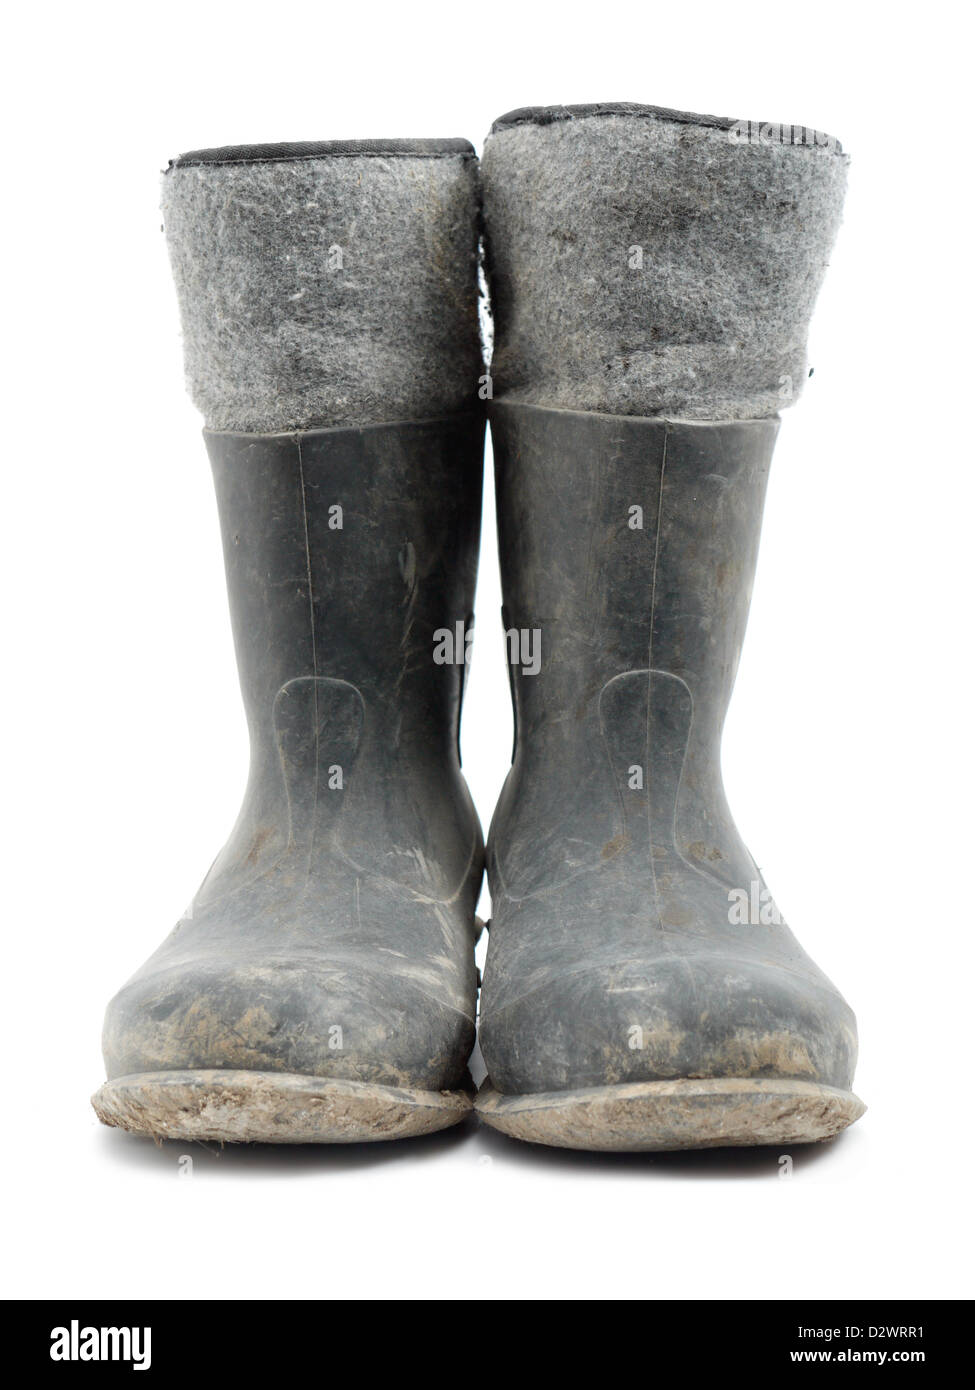 Dirty rubber-soled felt insulated boots shot over white Stock Photo